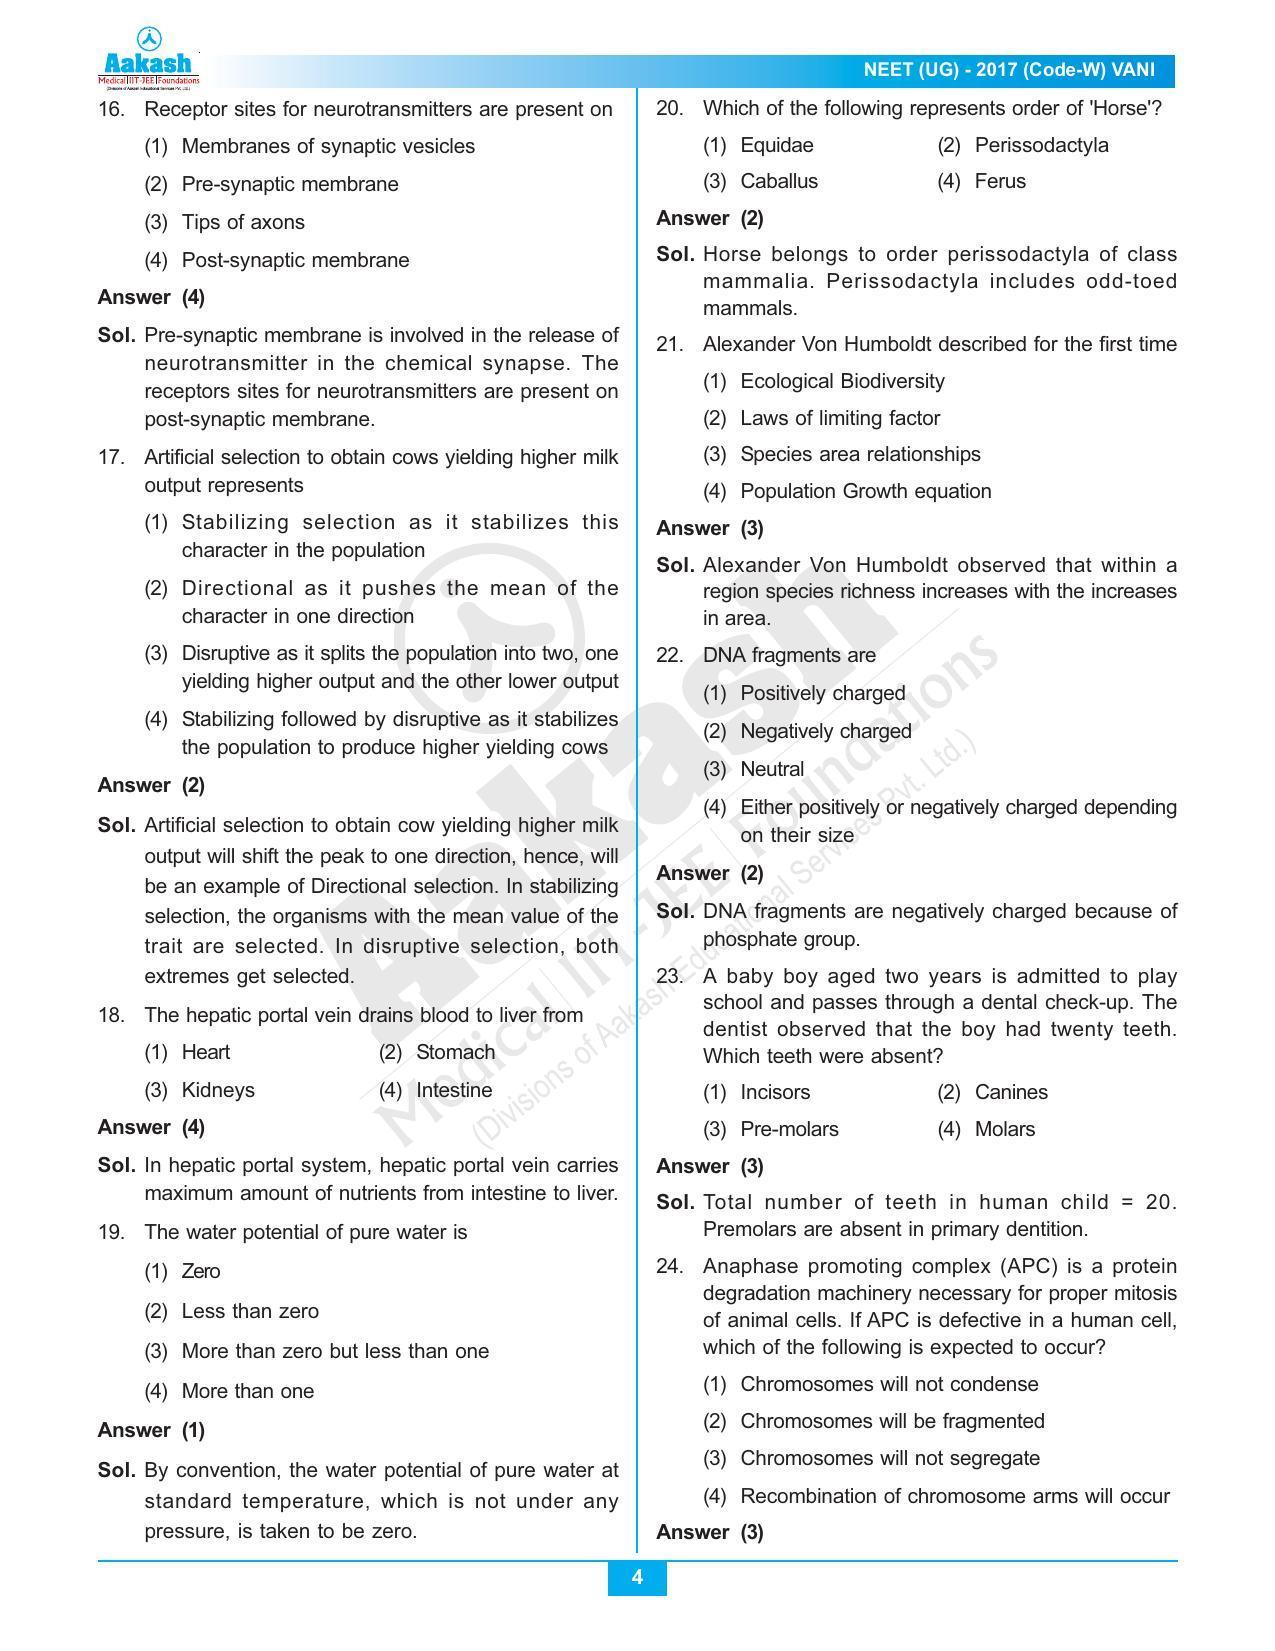  NEET Code W 2017 Answer & Solutions - Page 4